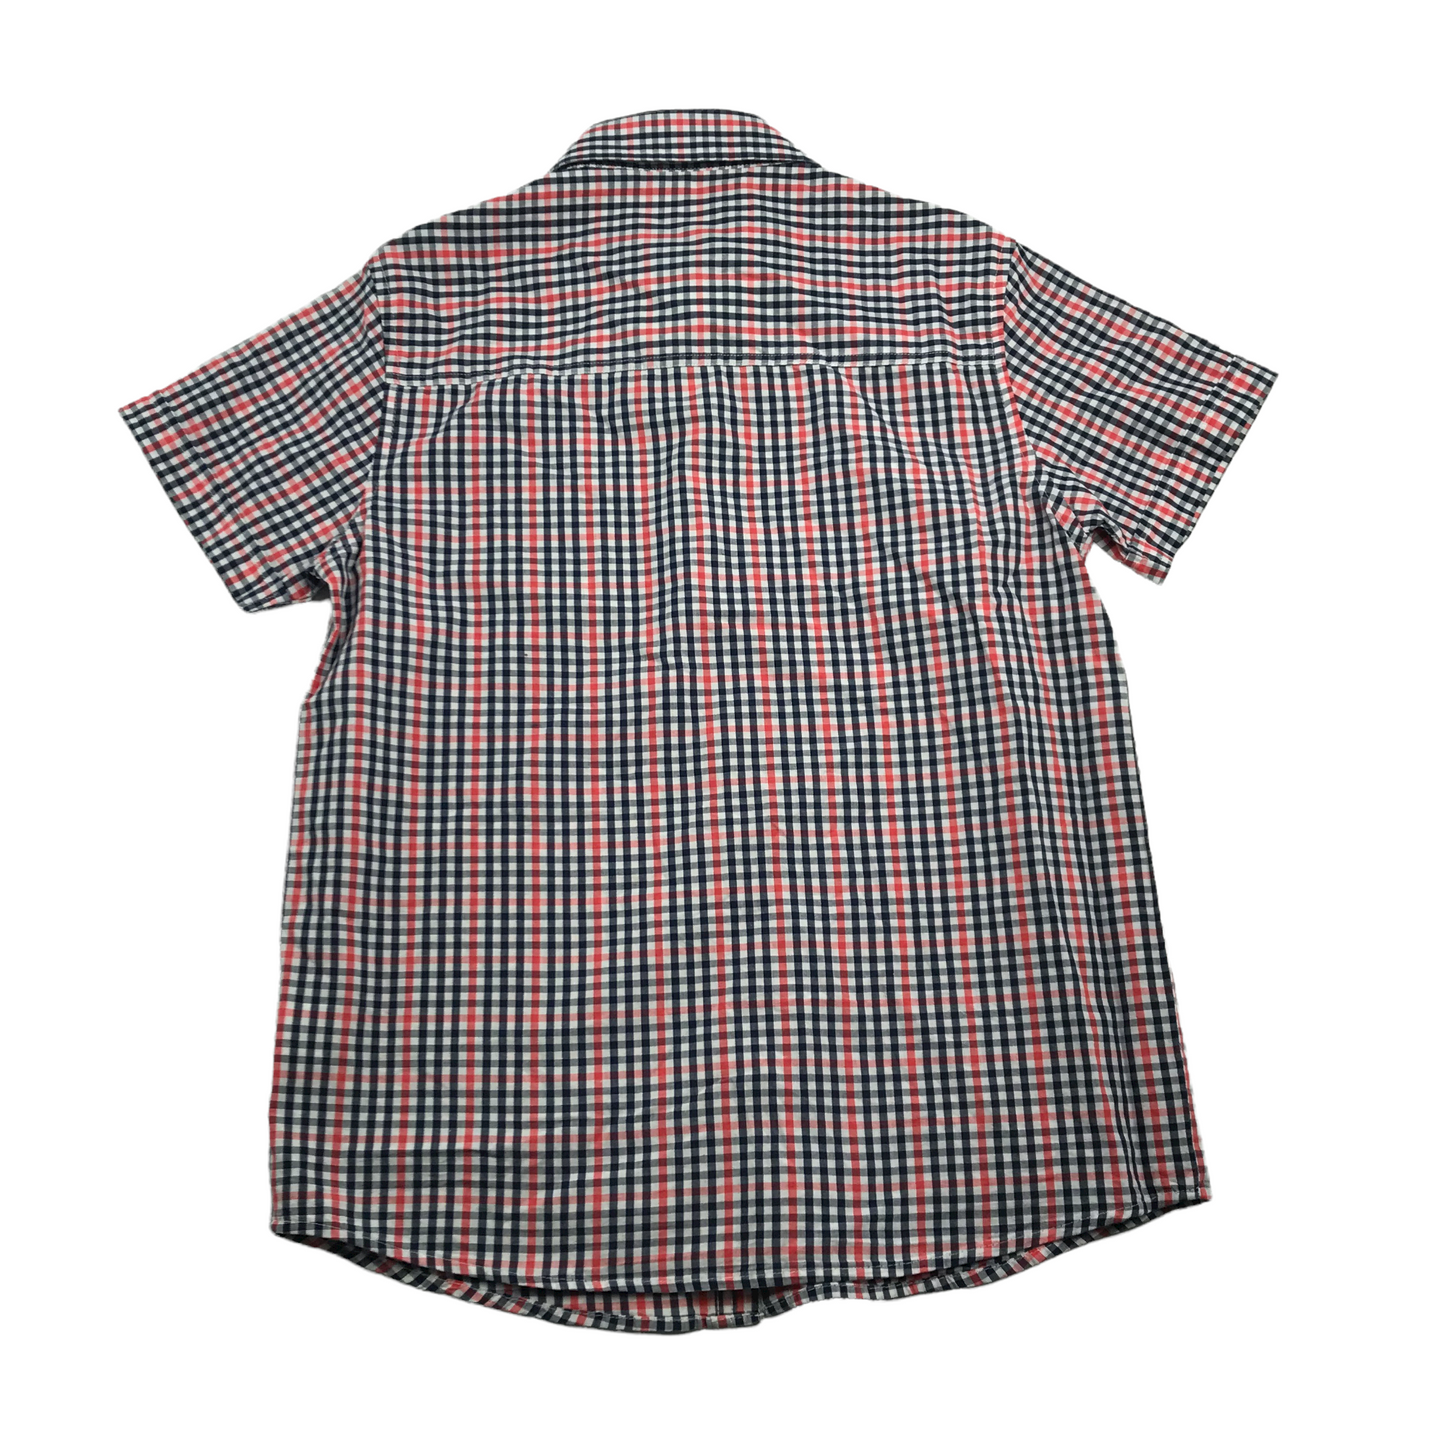 Primark Red and Navy Checked Short Sleeve Shirt Age 11